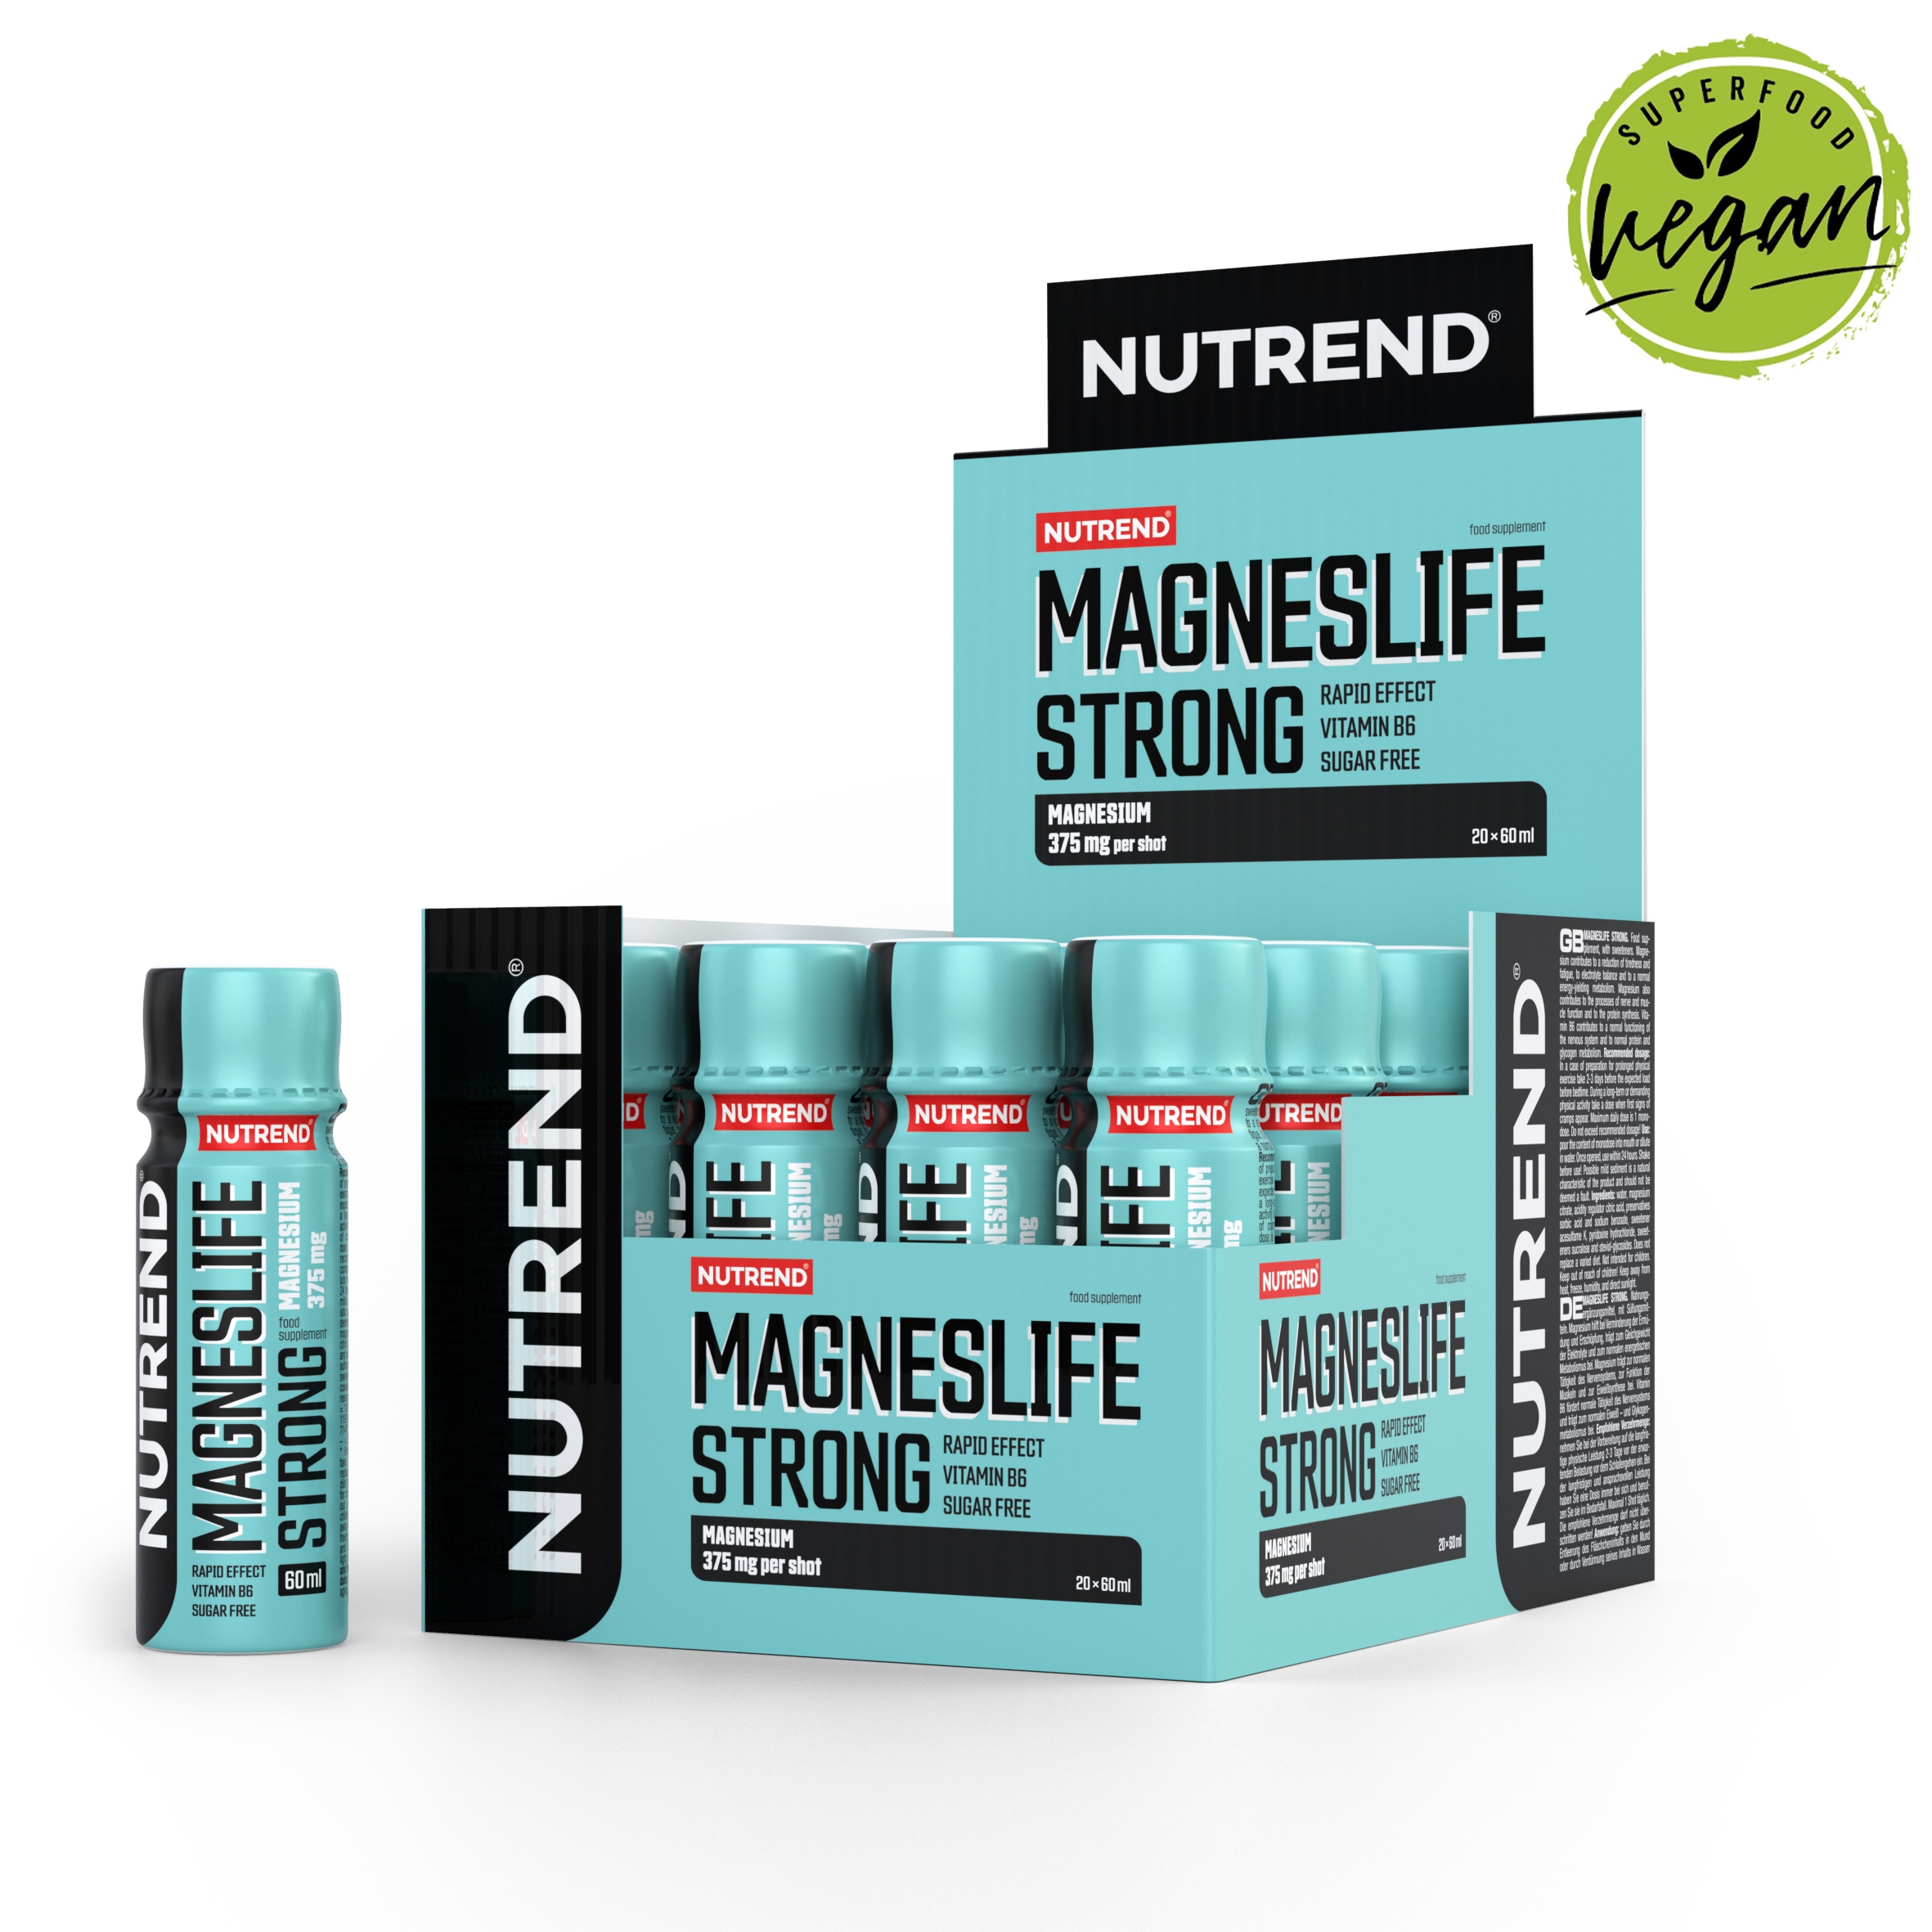 MAGNESLIFE STRONG      20 x 60ml